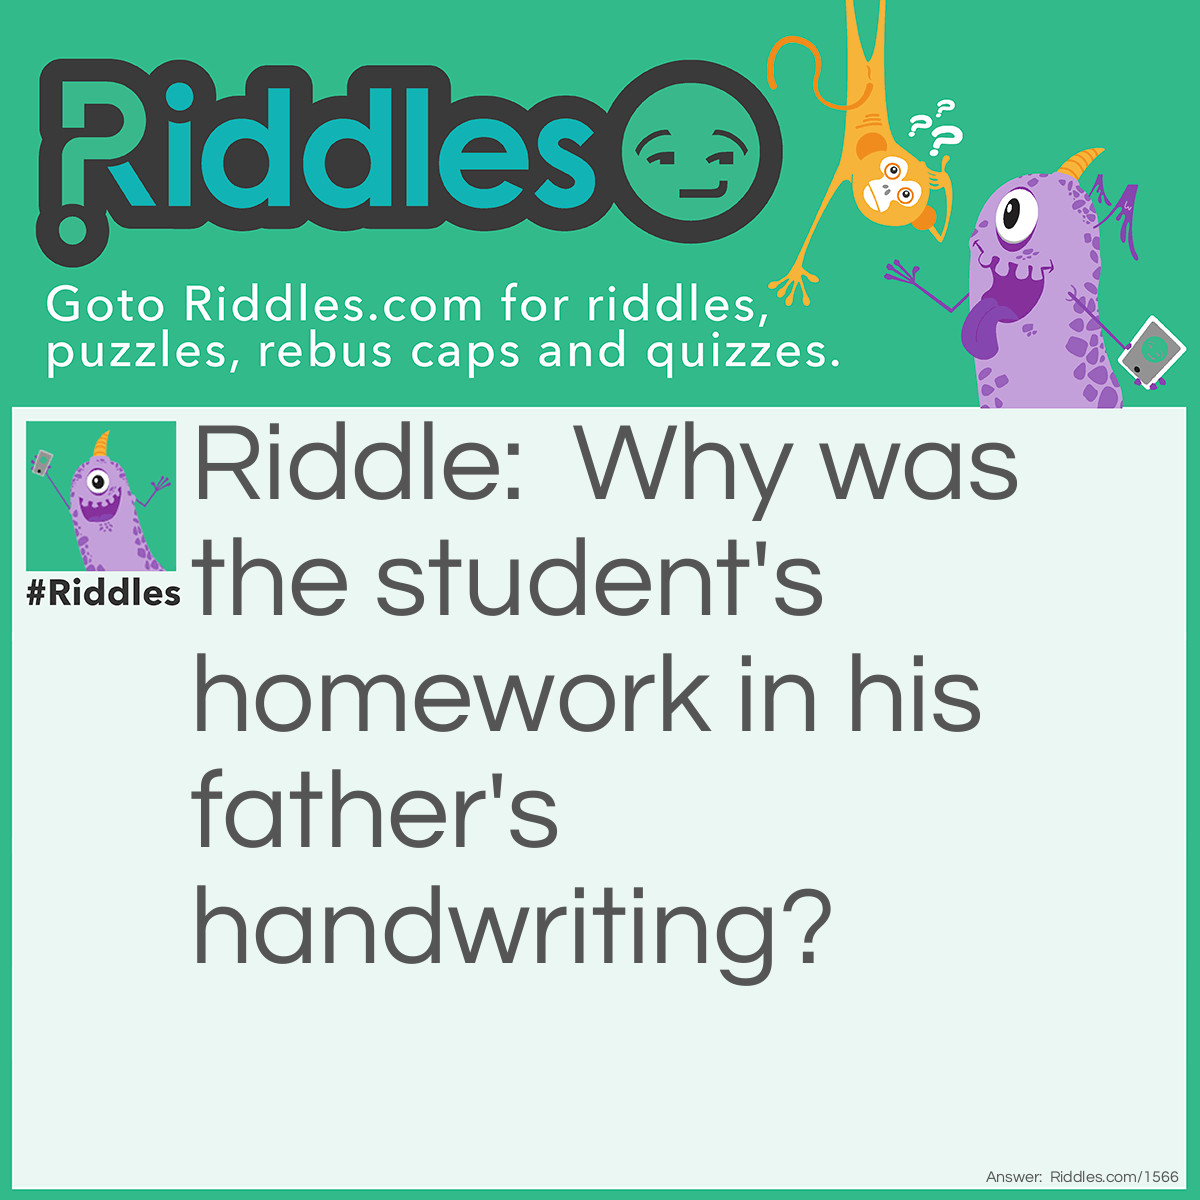 Riddle: Why was the student's <a title="Riddles For Kids" href="https://www.riddles.com/riddles-for-kids">homework</a> in his father's handwriting? Answer: Because the student borrowed his pen.